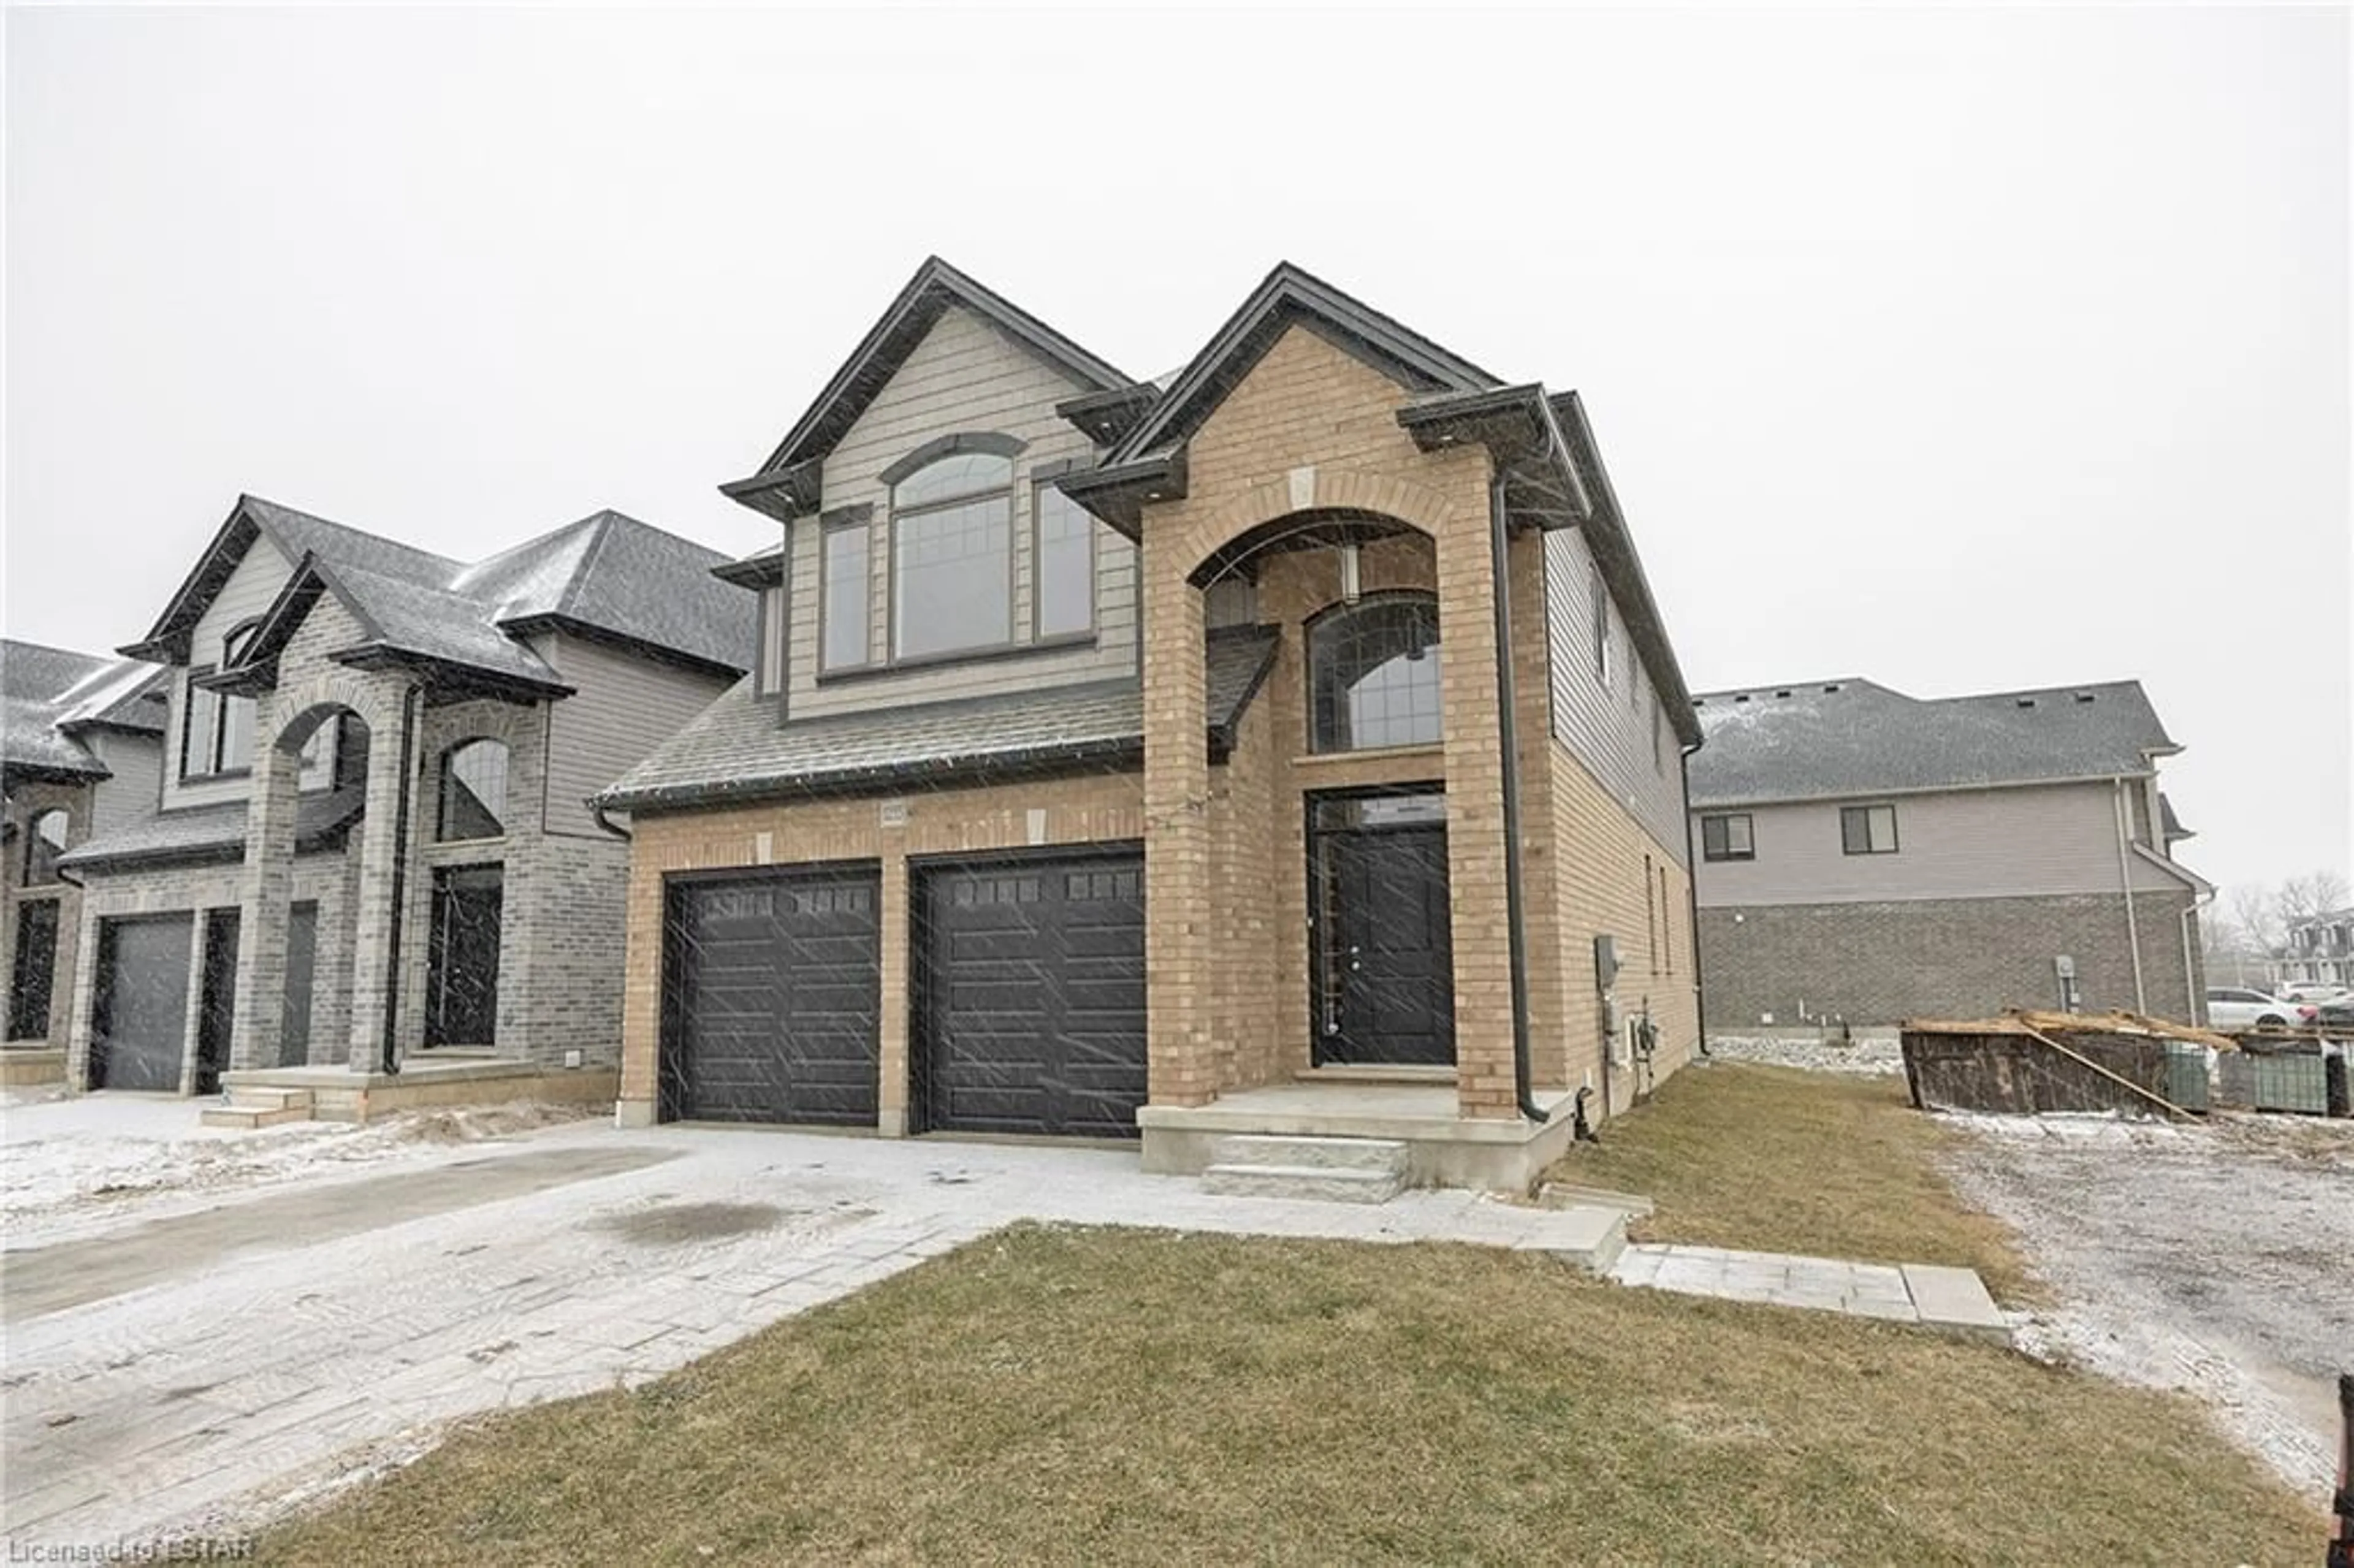 Home with brick exterior material for 1596 Noah BEND, London Ontario N6G 0T2